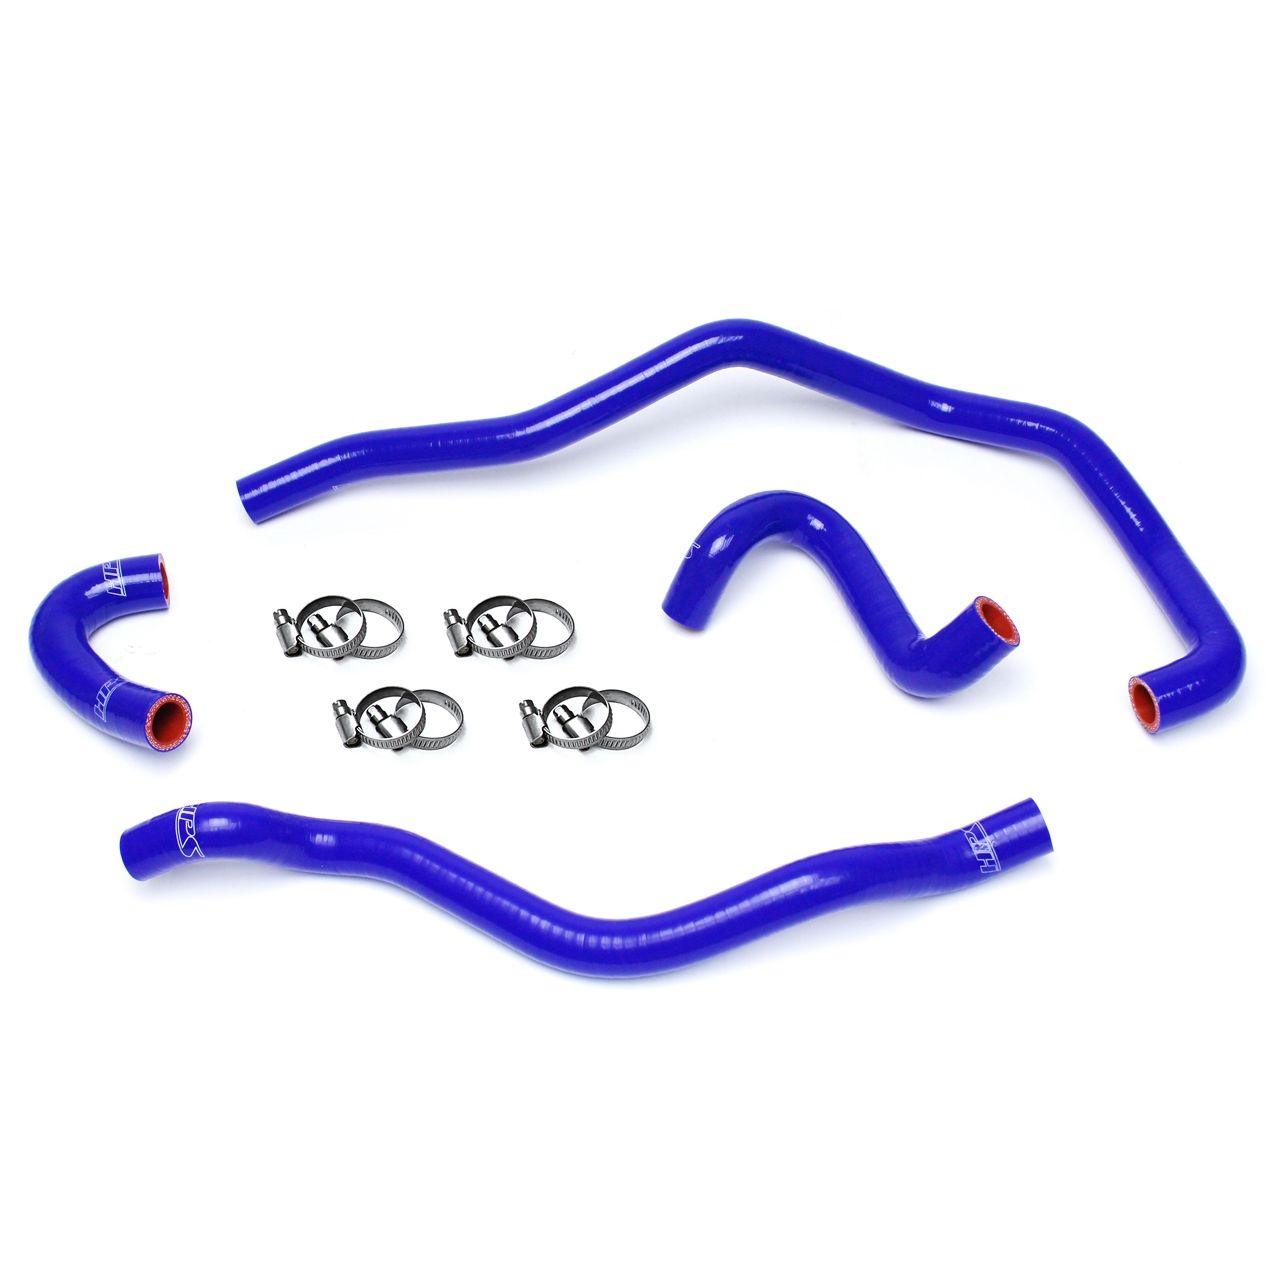 HPS Performance High Temp 3-ply Reinforced SiliconeReplace OEM Rubber Heater Coolant Hoses